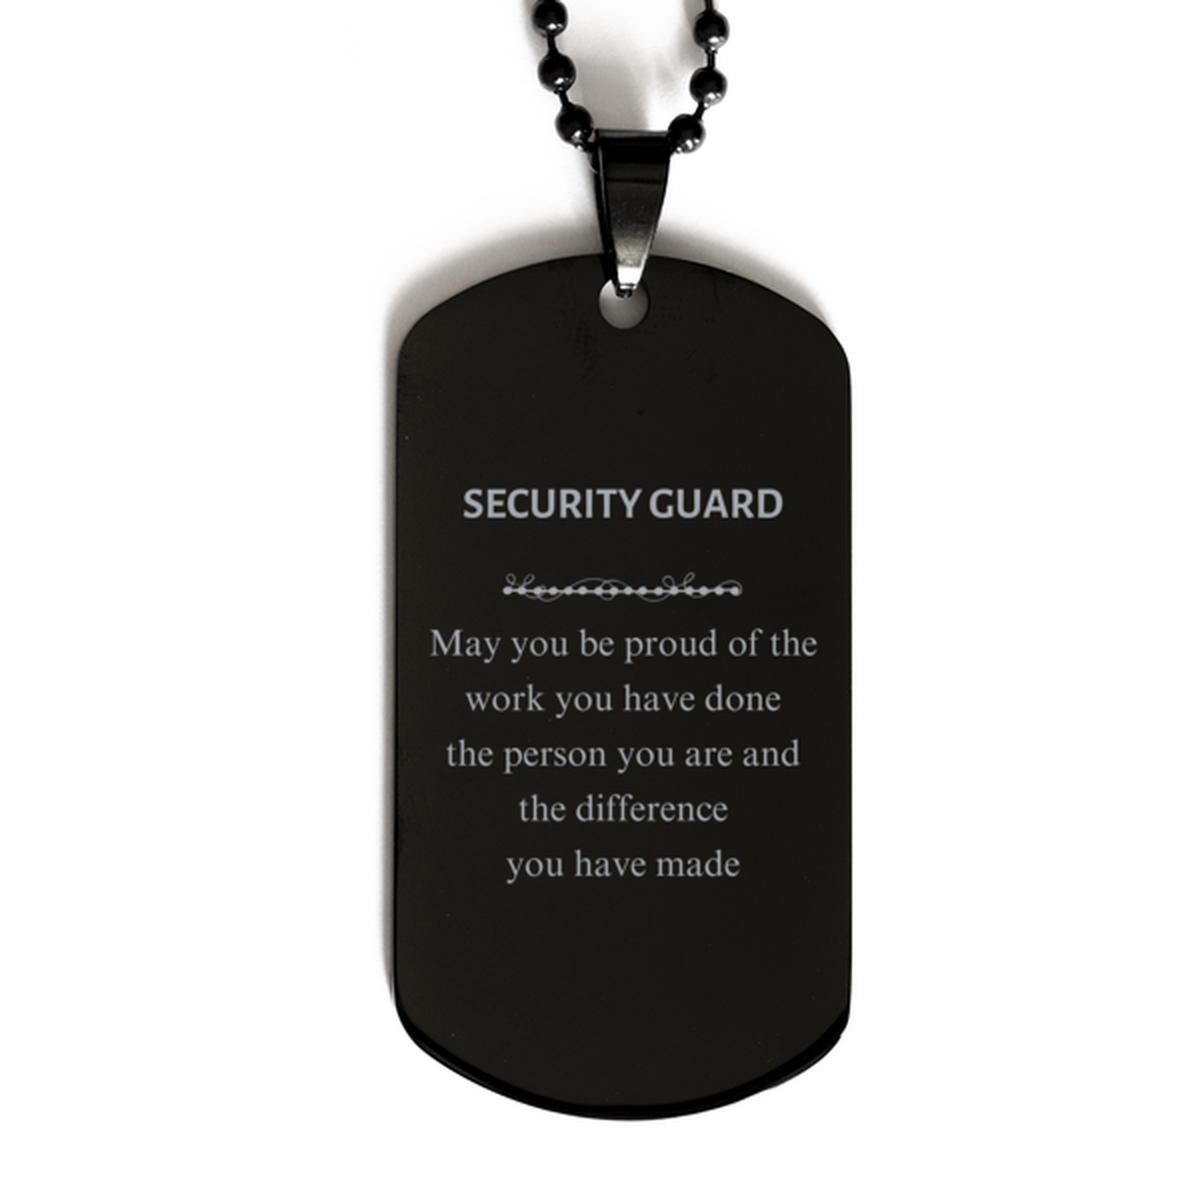 Security Guard May you be proud of the work you have done, Retirement Security Guard Black Dog Tag for Colleague Appreciation Gifts Amazing for Security Guard